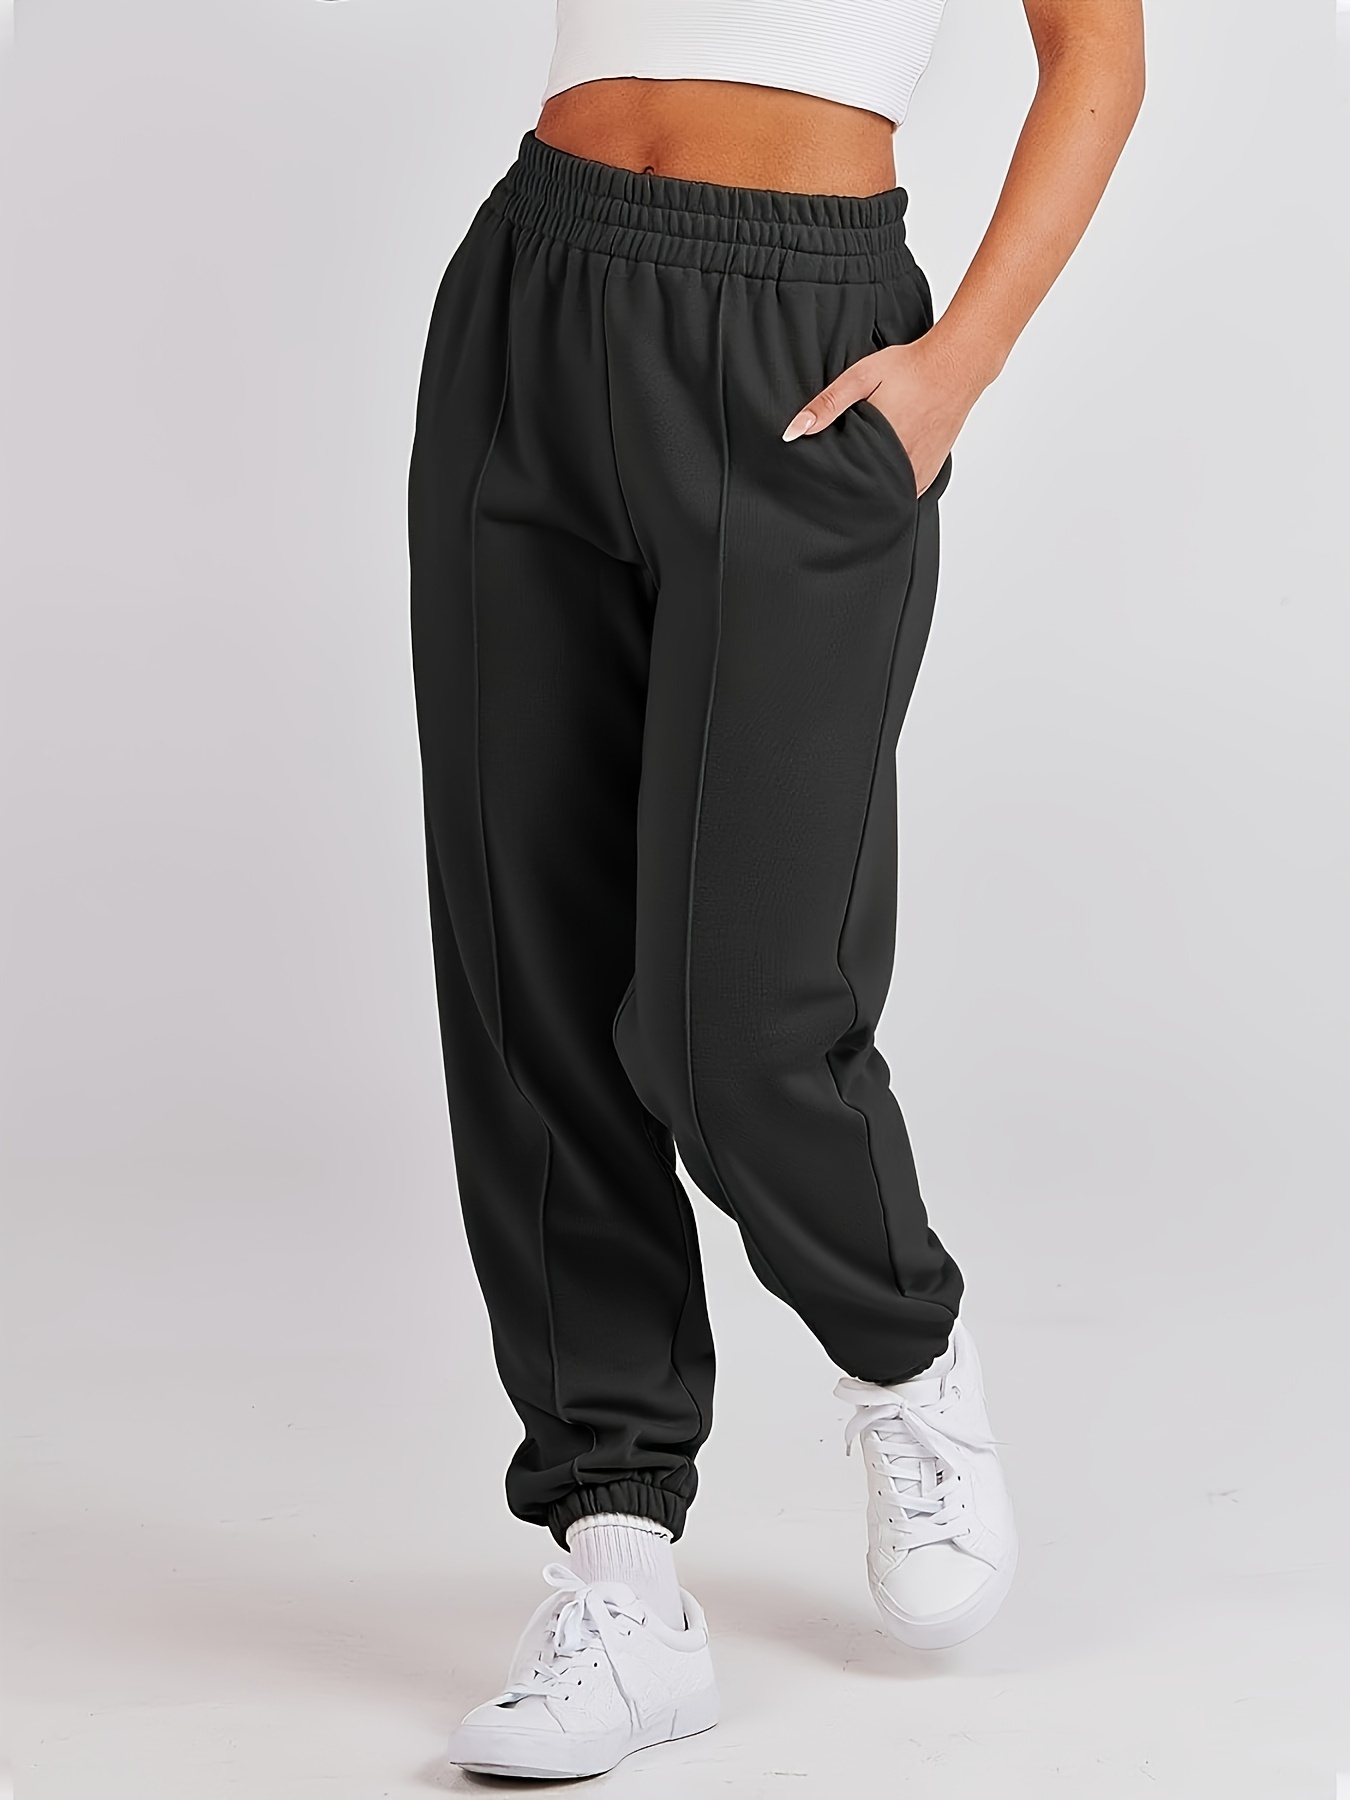 Women Sweatpants, Casual Sweatpants High Waisted For Fitness XL 